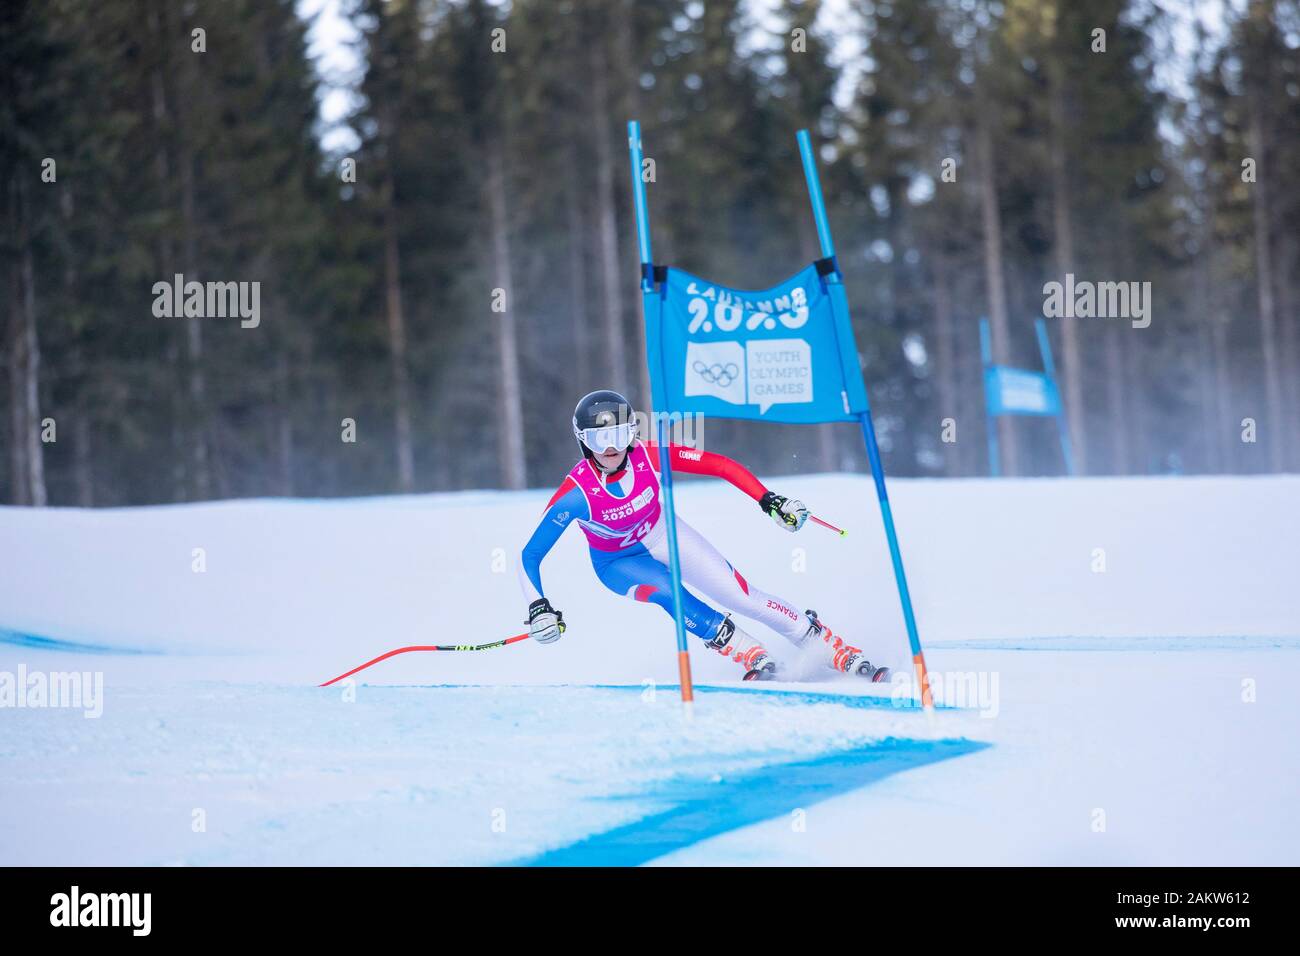 Alpine skier, Chiara Pogneaux, FRA, competes in the Lausanne 2020 Women's Super G Downhill Skiing At Les Diablerets Alpine Centre In Switzerland Stock Photo